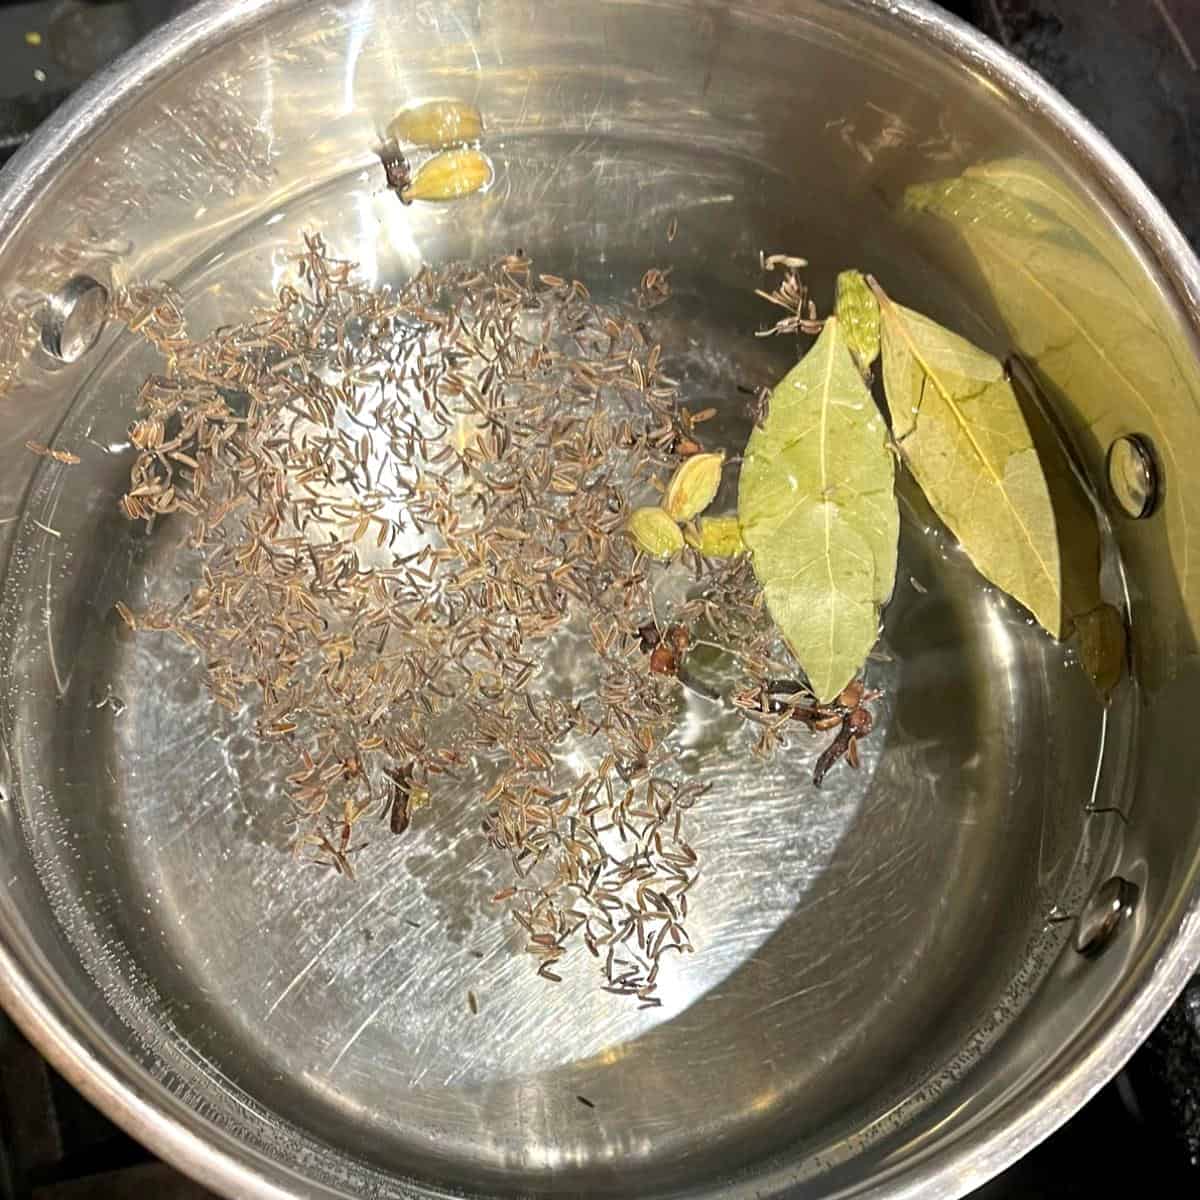 Bay leaves, cardamom, cloves and caraway seeds in water for veg biryani rice.